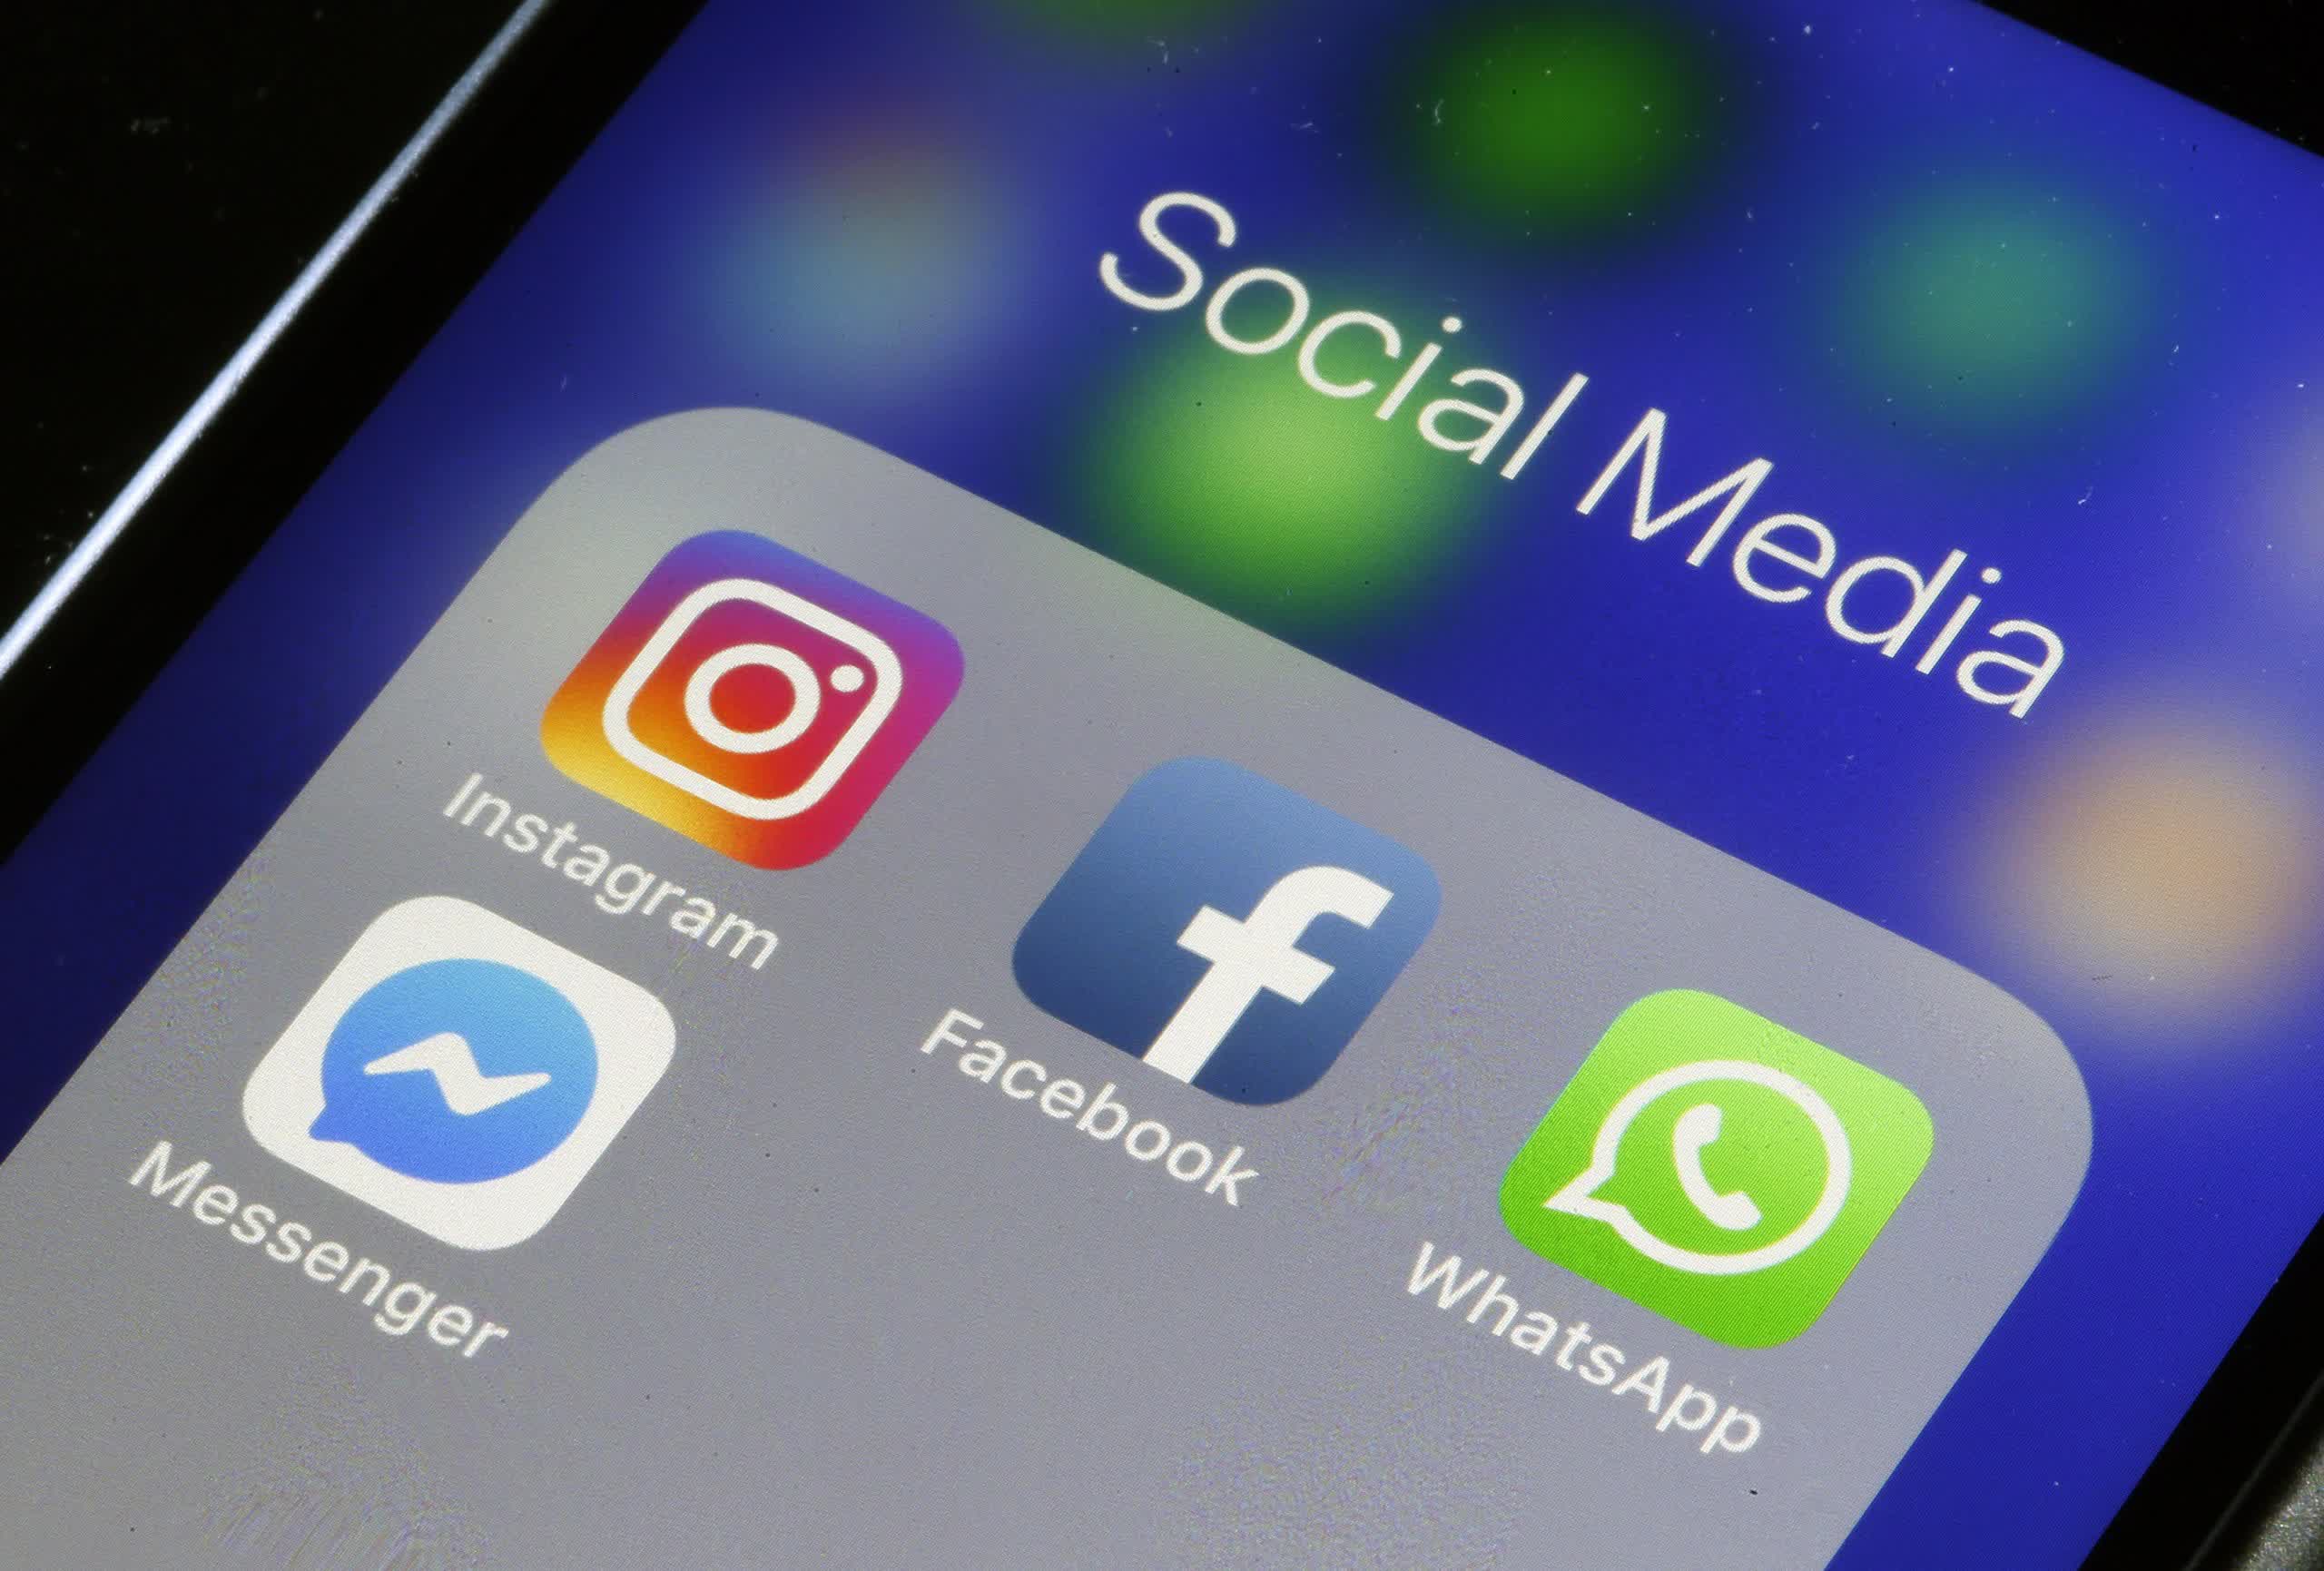 Russia blocks social media platforms in response to actions against state media